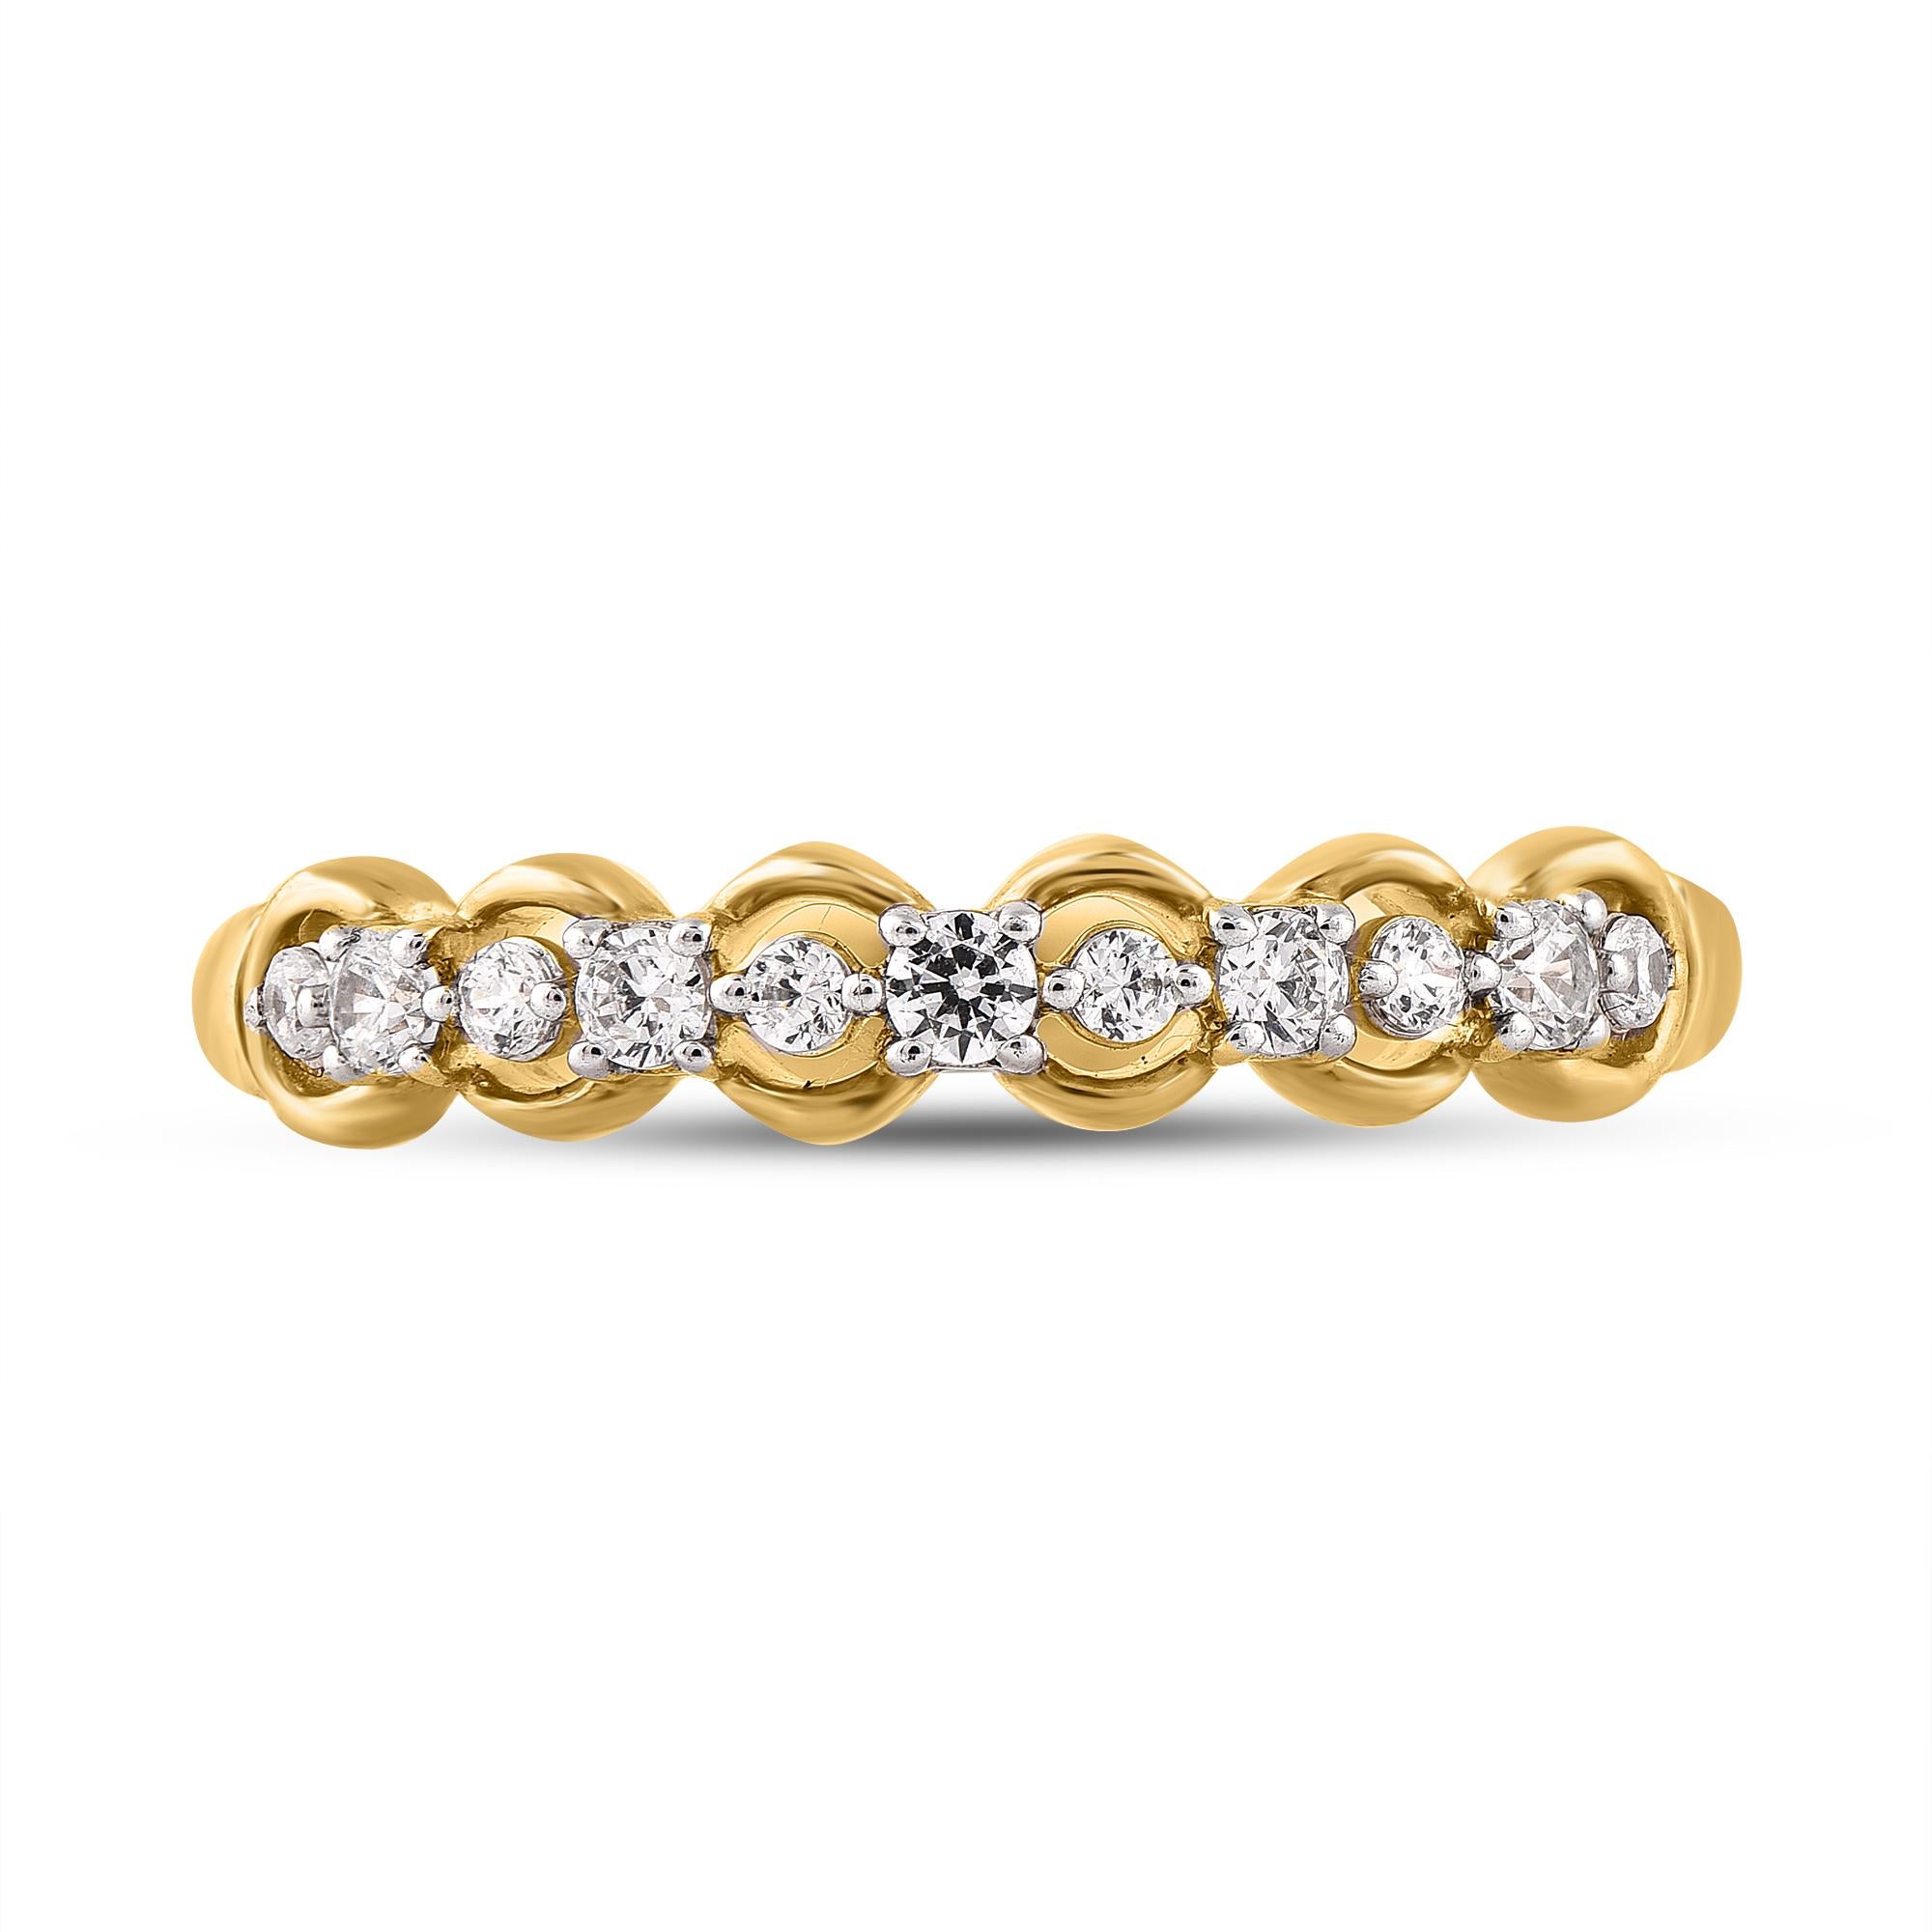 Honor your special day with this exceptional diamond band ring. Crafted in 14 Karat yellow gold. This band ring features a sparkling 11 brilliant cut round diamonds beautifully set in prong setting. The total diamond weight is 0.25 Carat. The